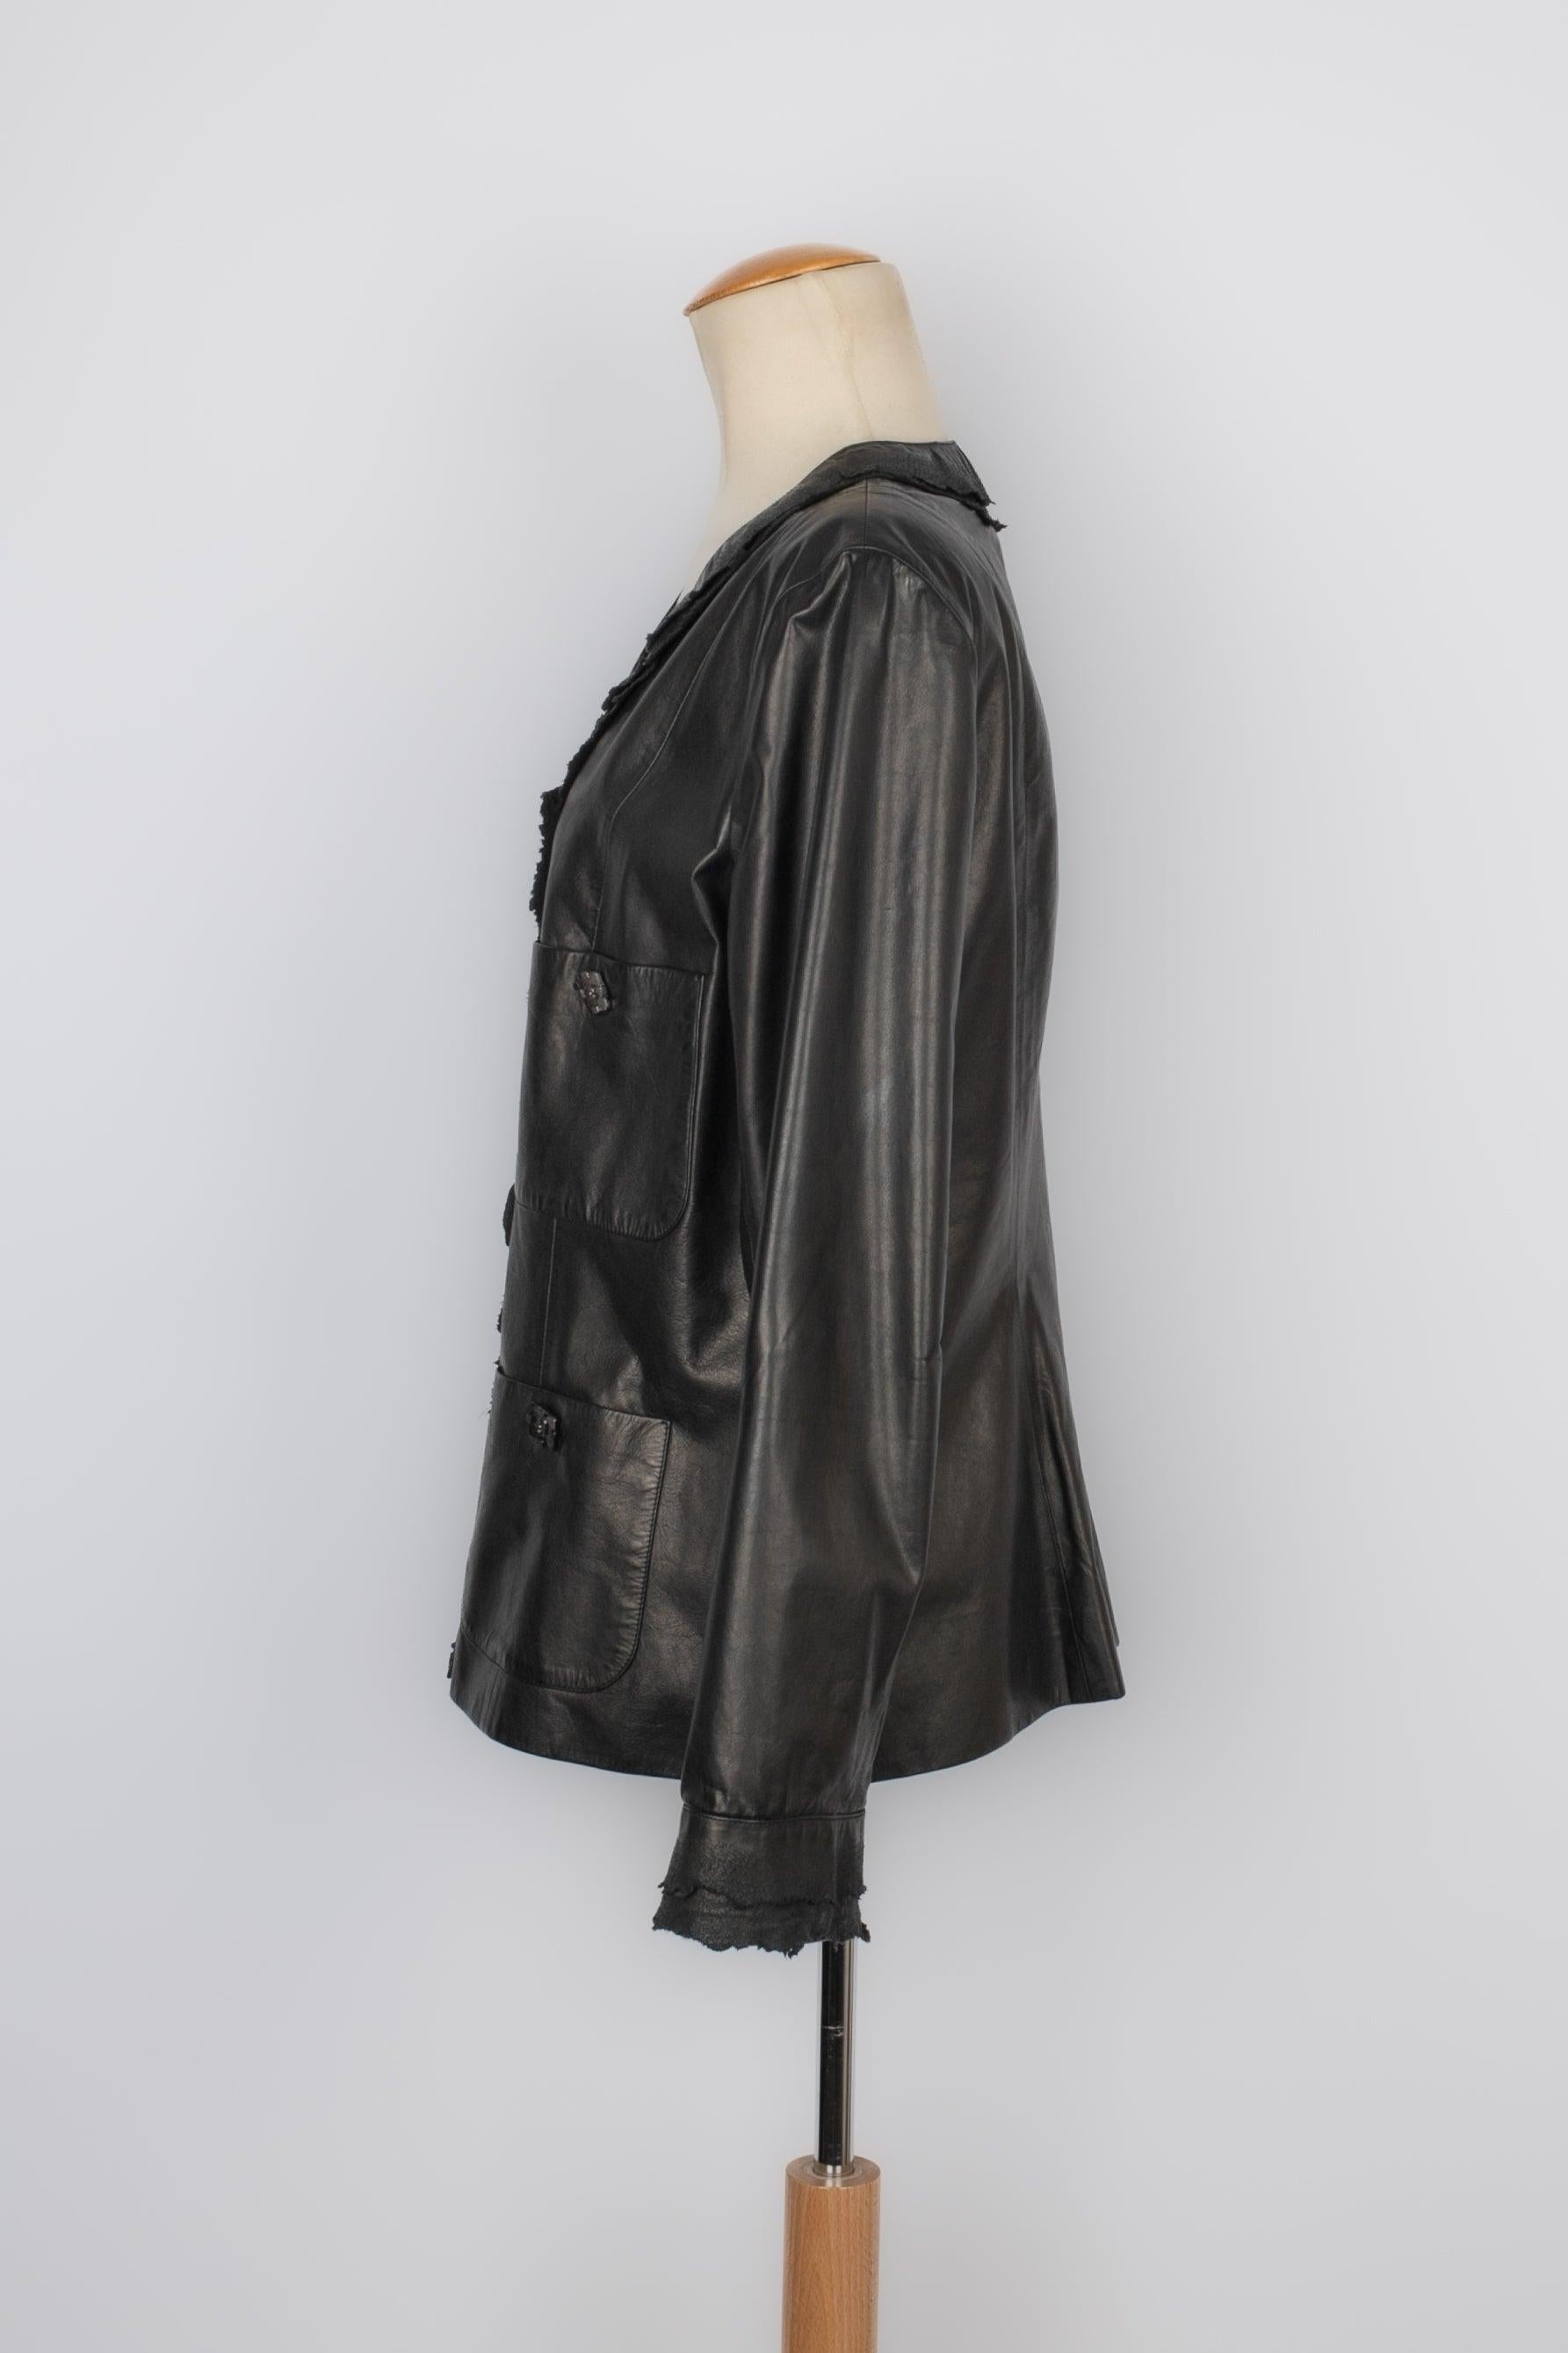 Women's Chanel Leather Jacket in Black Calfskin and Silk Lining For Sale